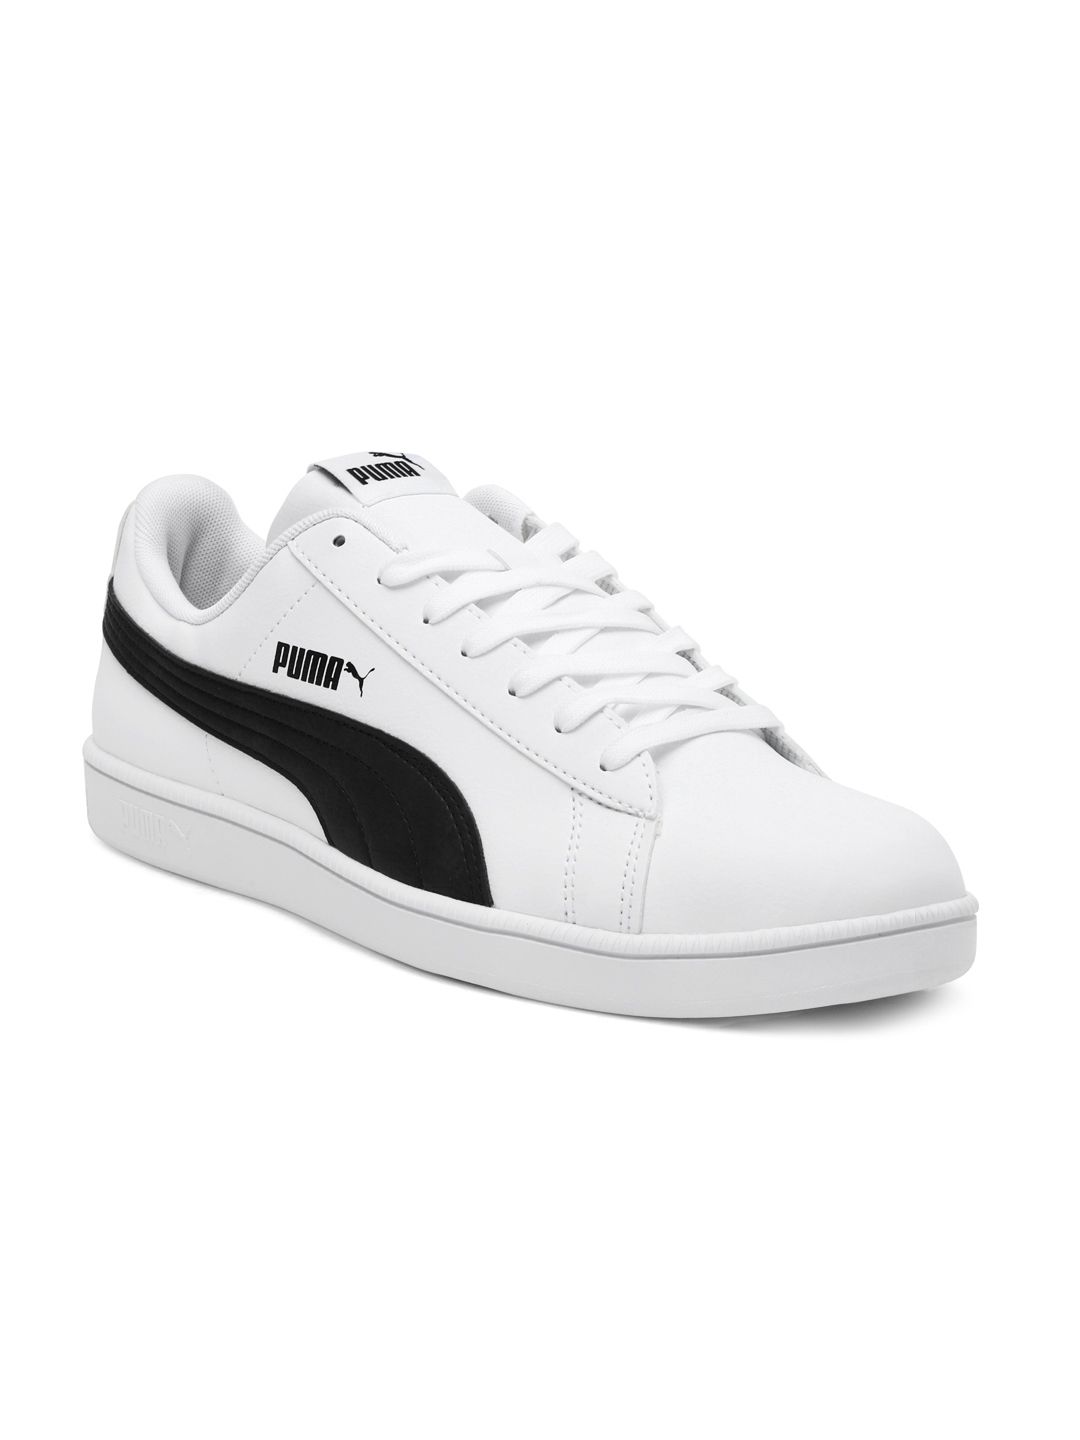 Puma Unisex White Up Sneakers Price in India